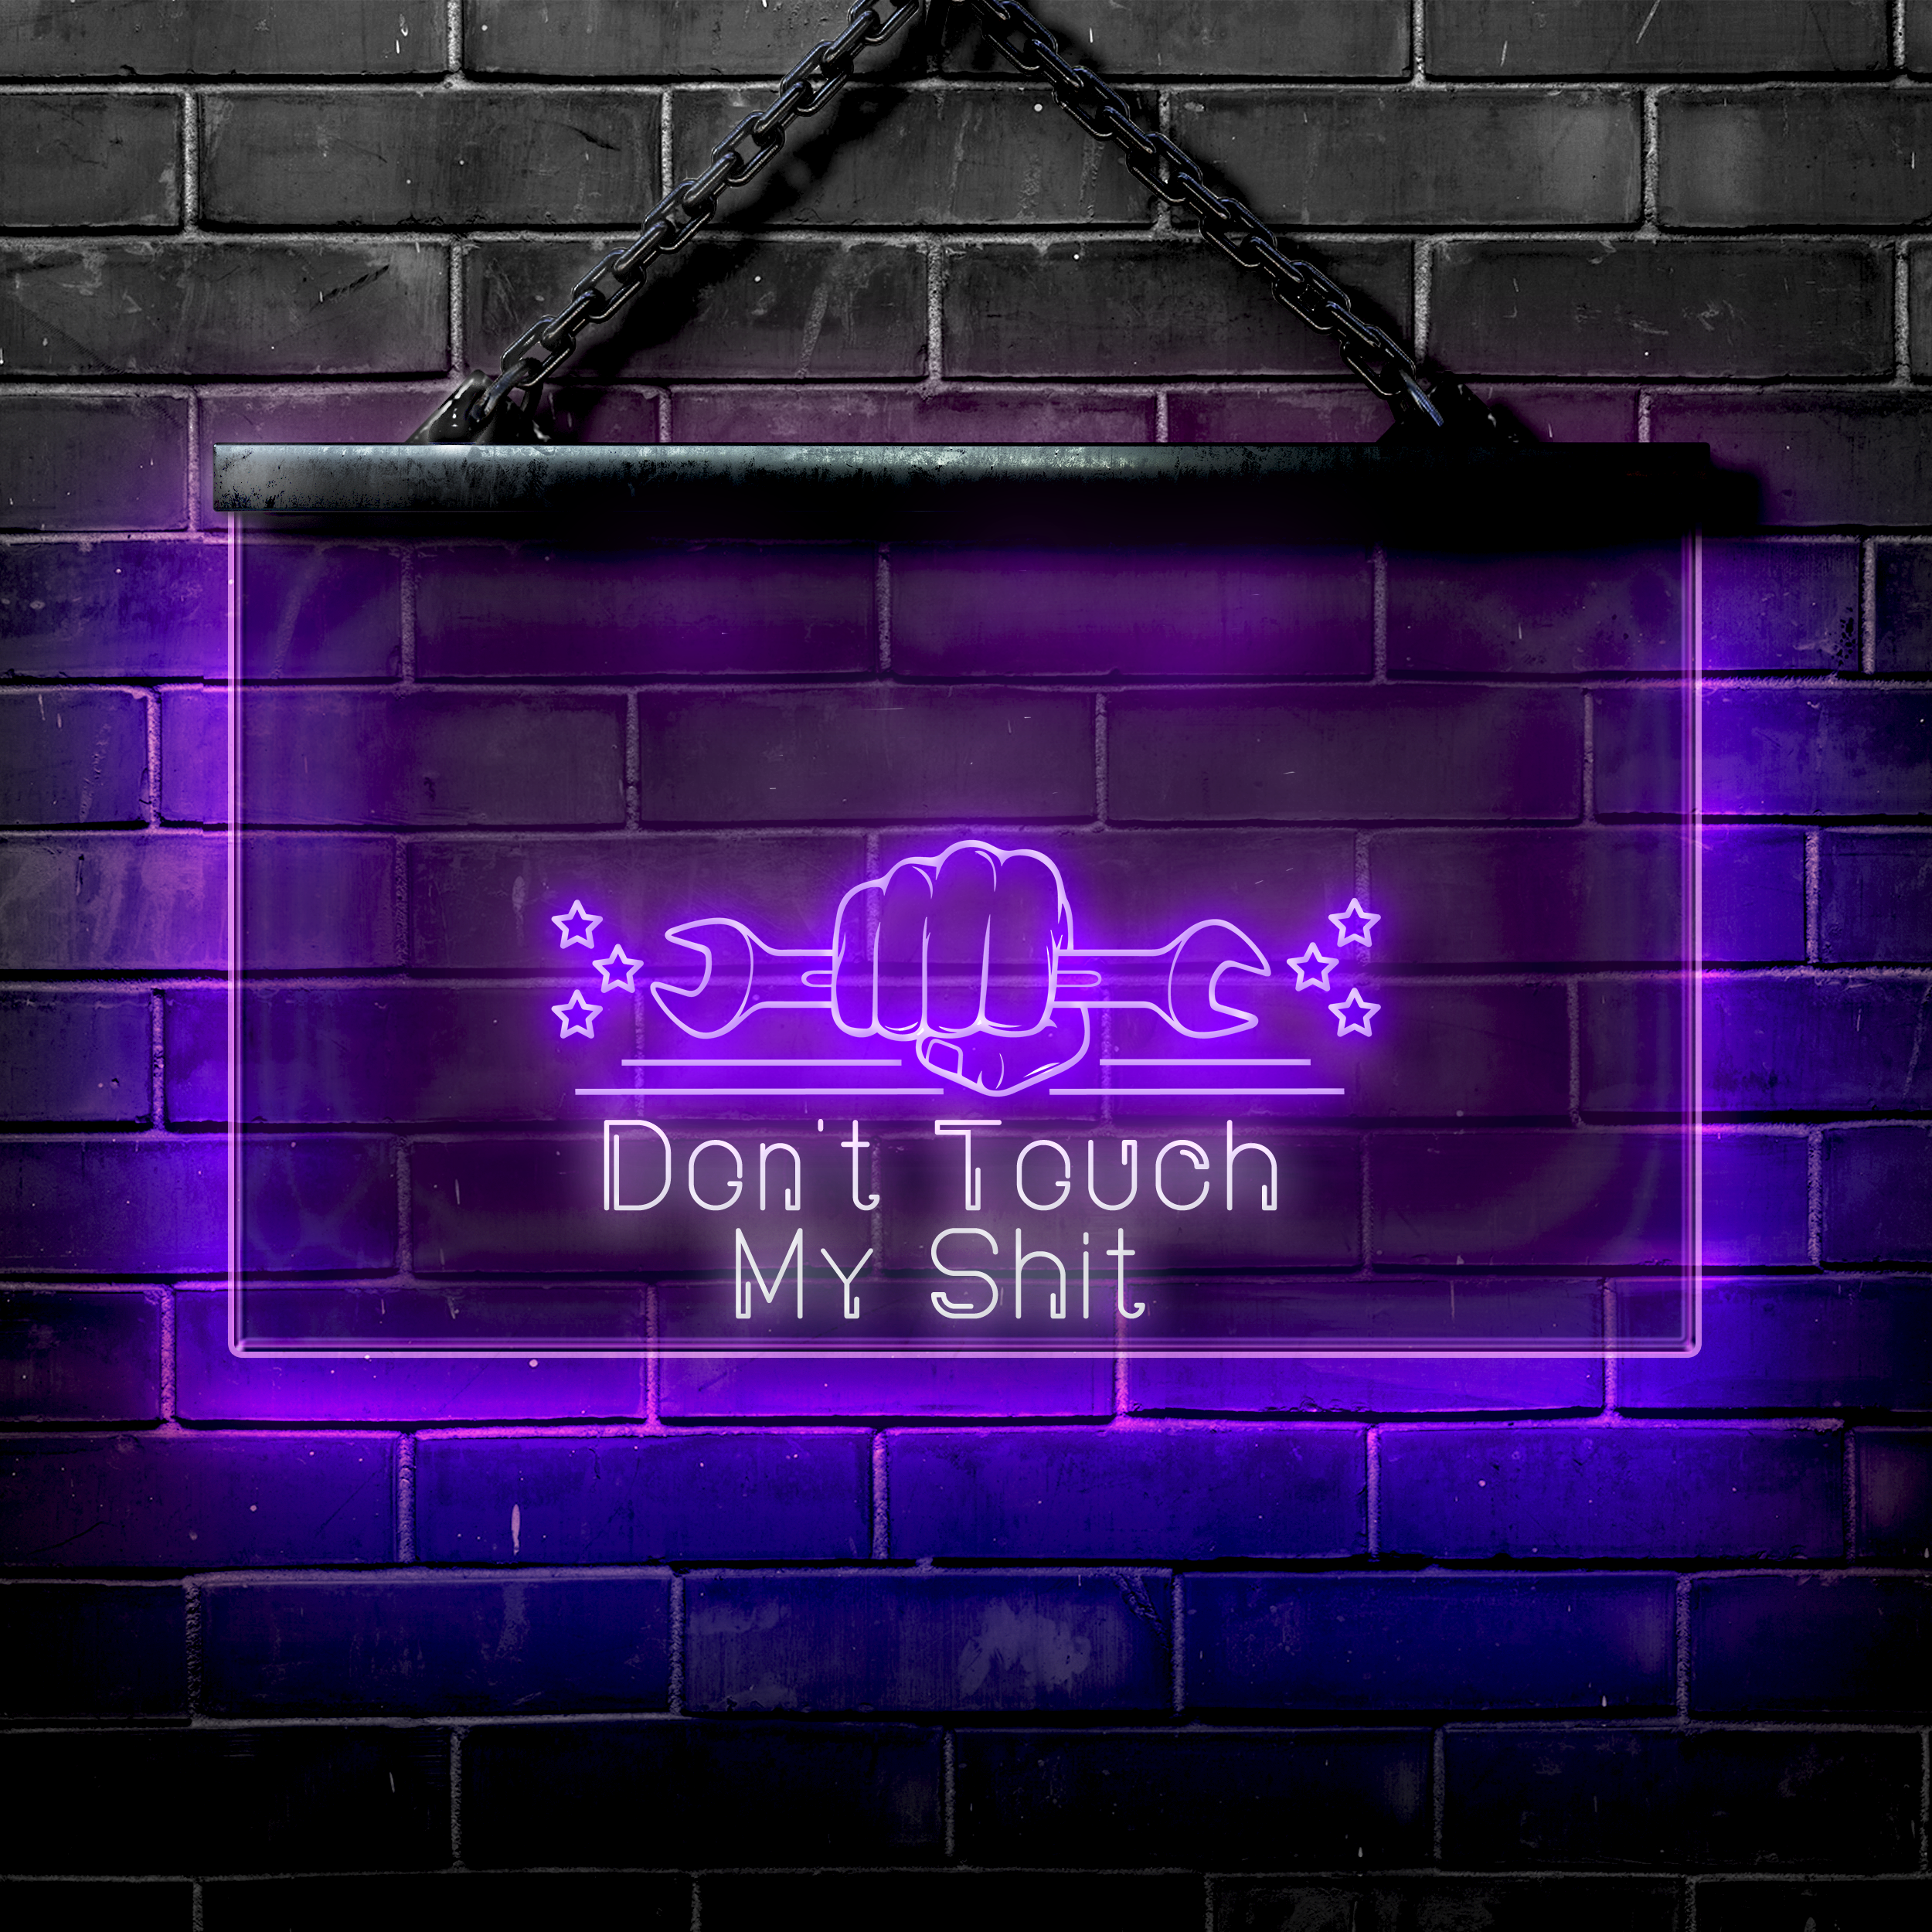 Personalized LED Garage Sign: Don't Touch My Shit - NeonFerry